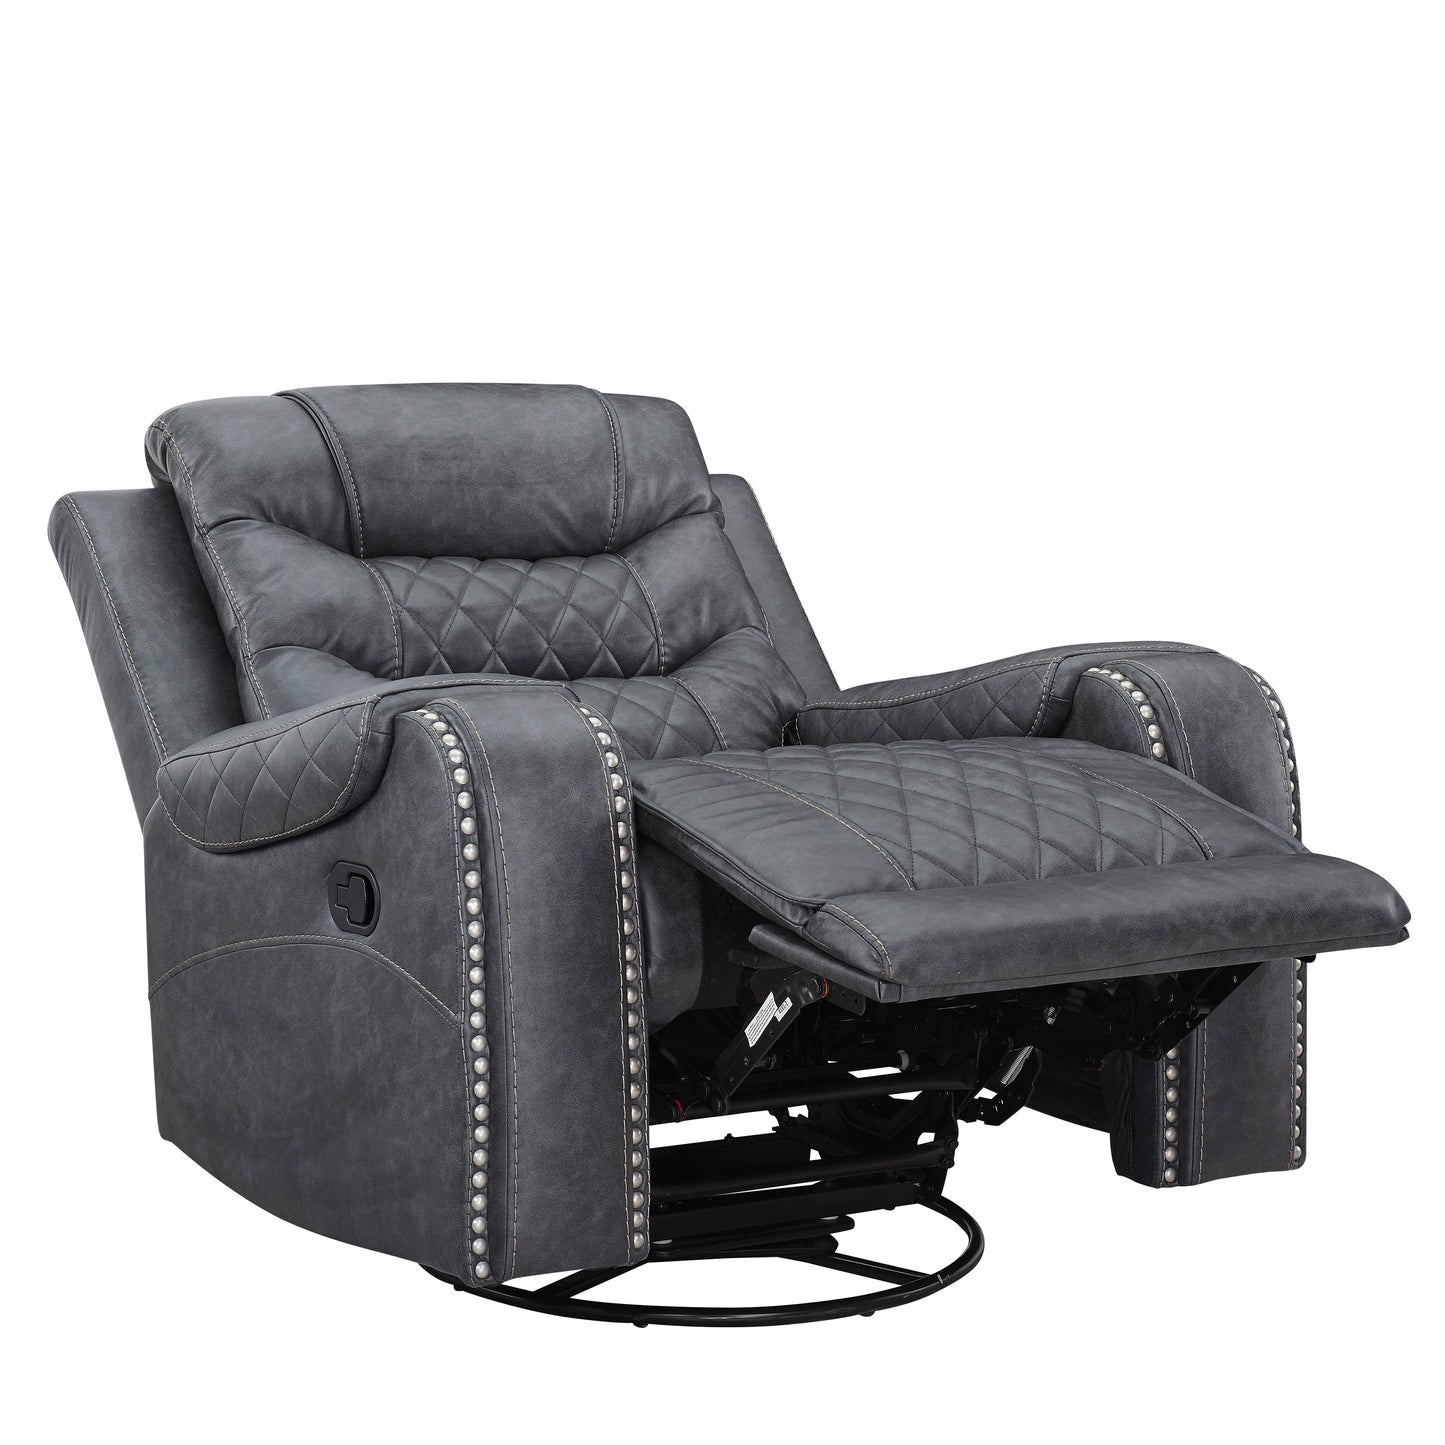 Klens Faux Leather Swivel Glider Recliner with Nailhead Trim, Gray